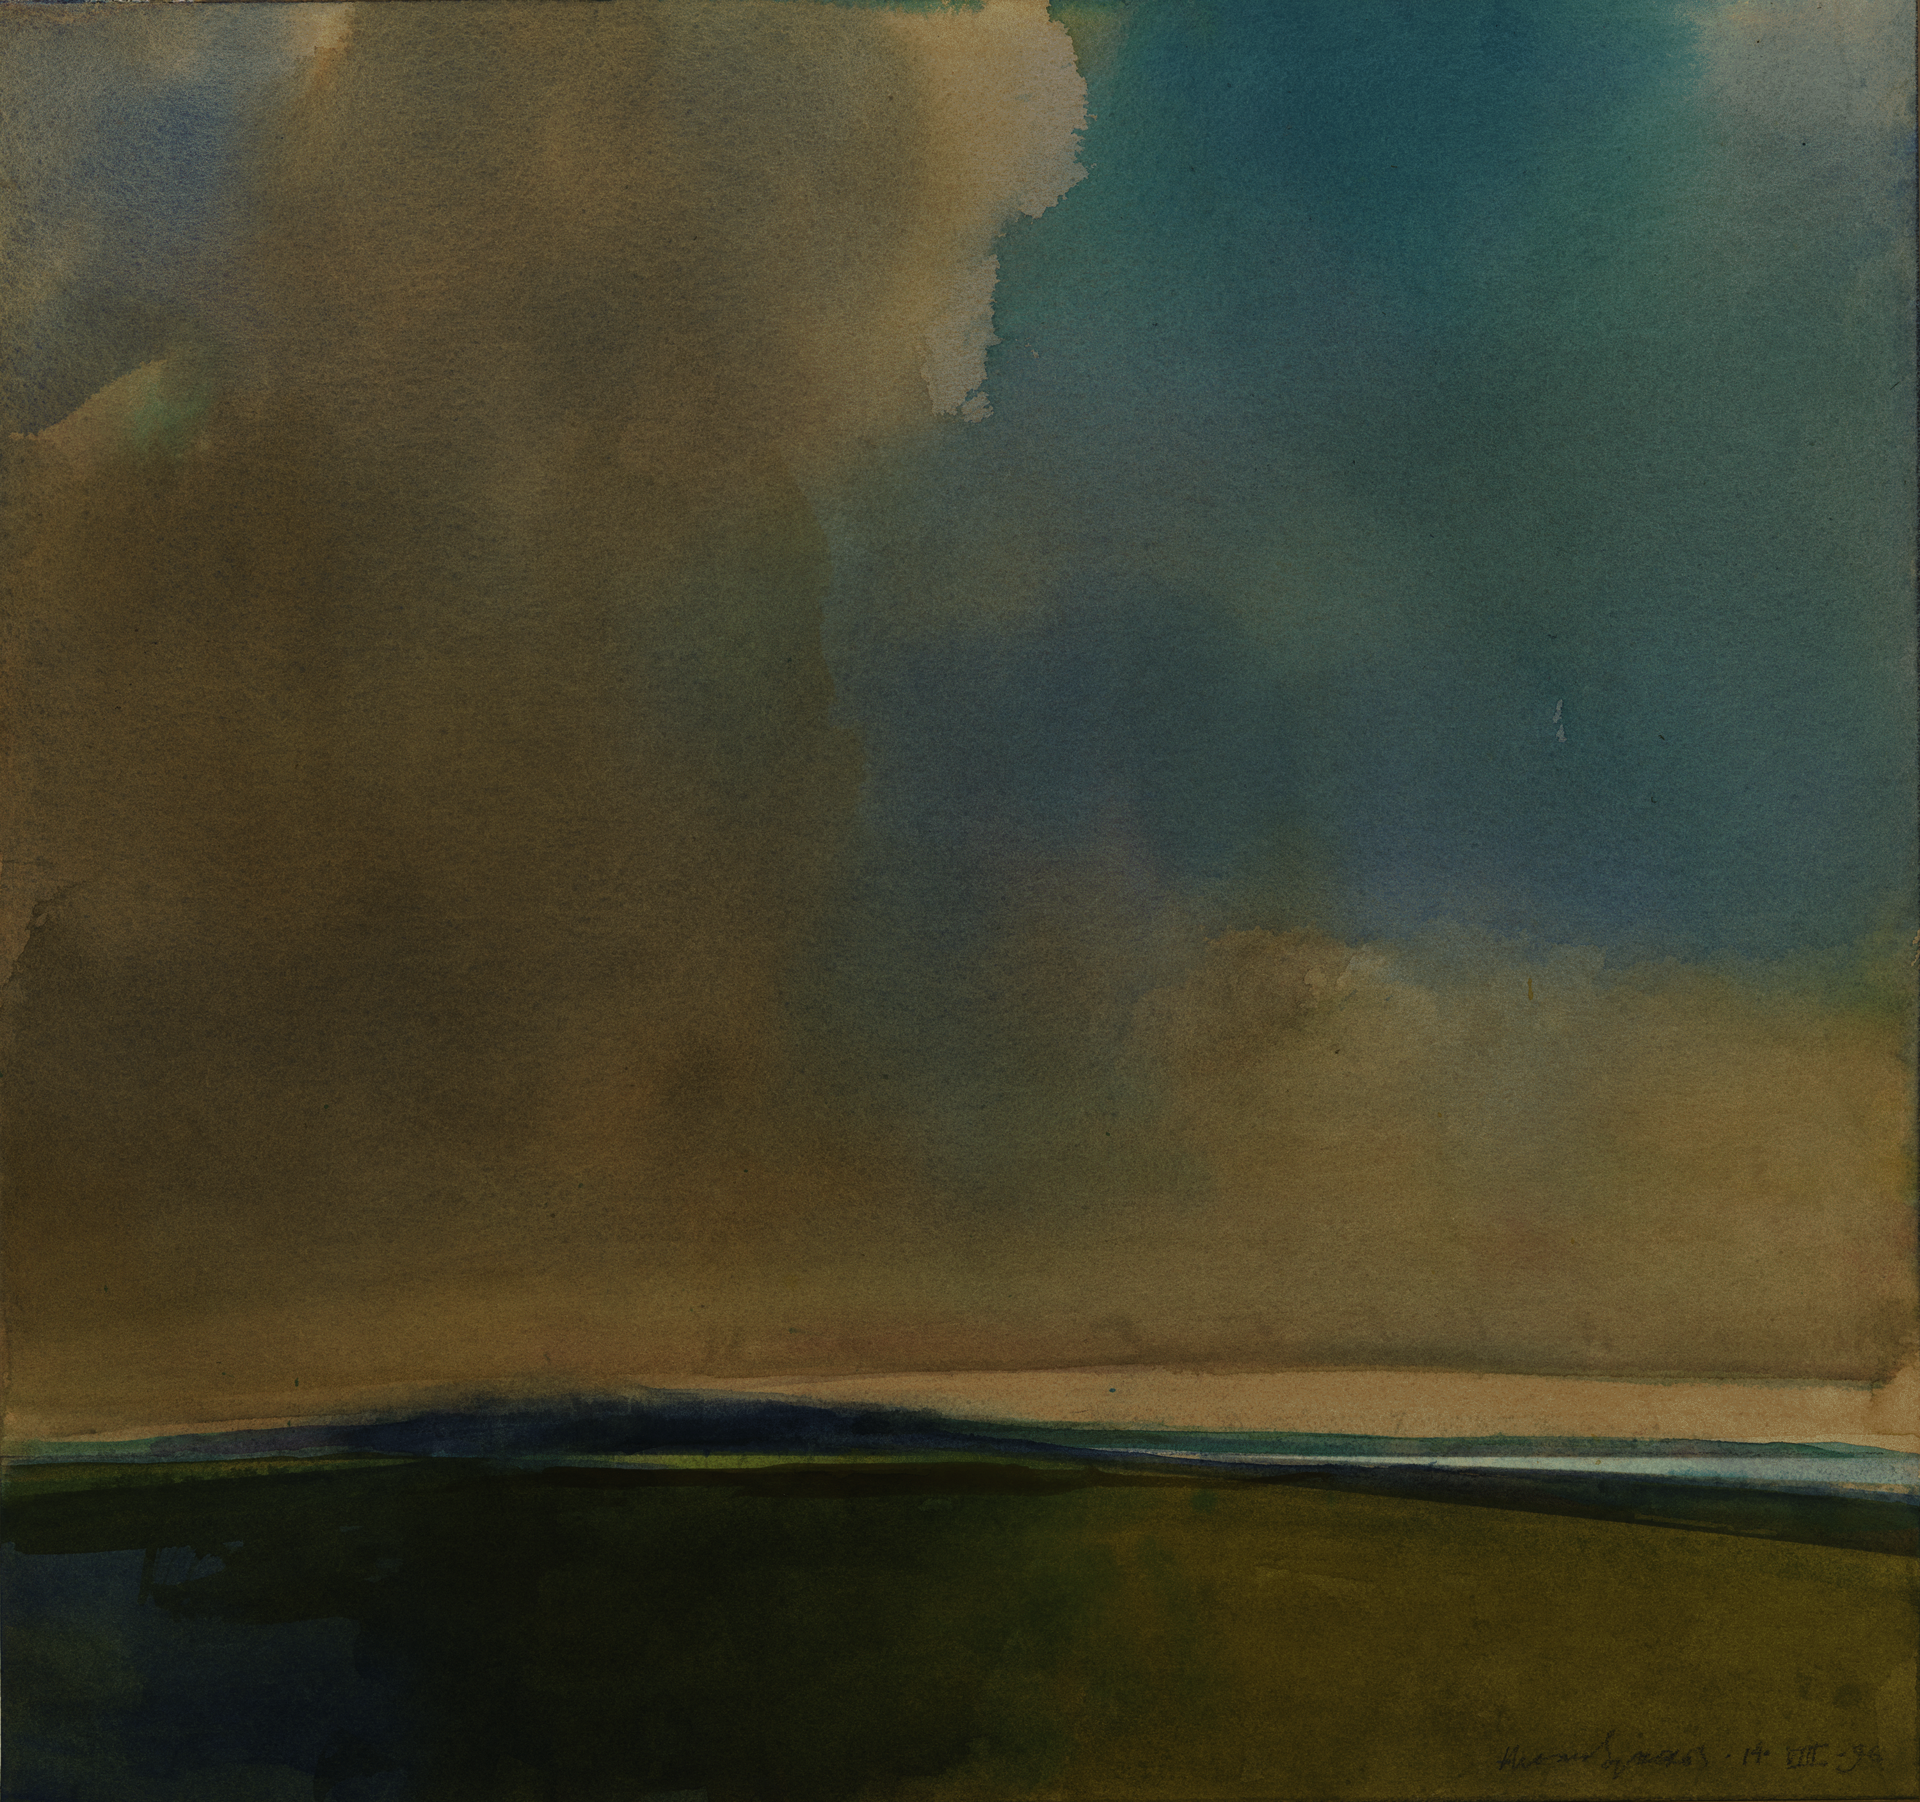 Hazy watercolor illustrates a green landscape and blue mountain in the distance. Most of the work is covered by a large, deep-yellow and gray cloud filling the otherwise teal sky.